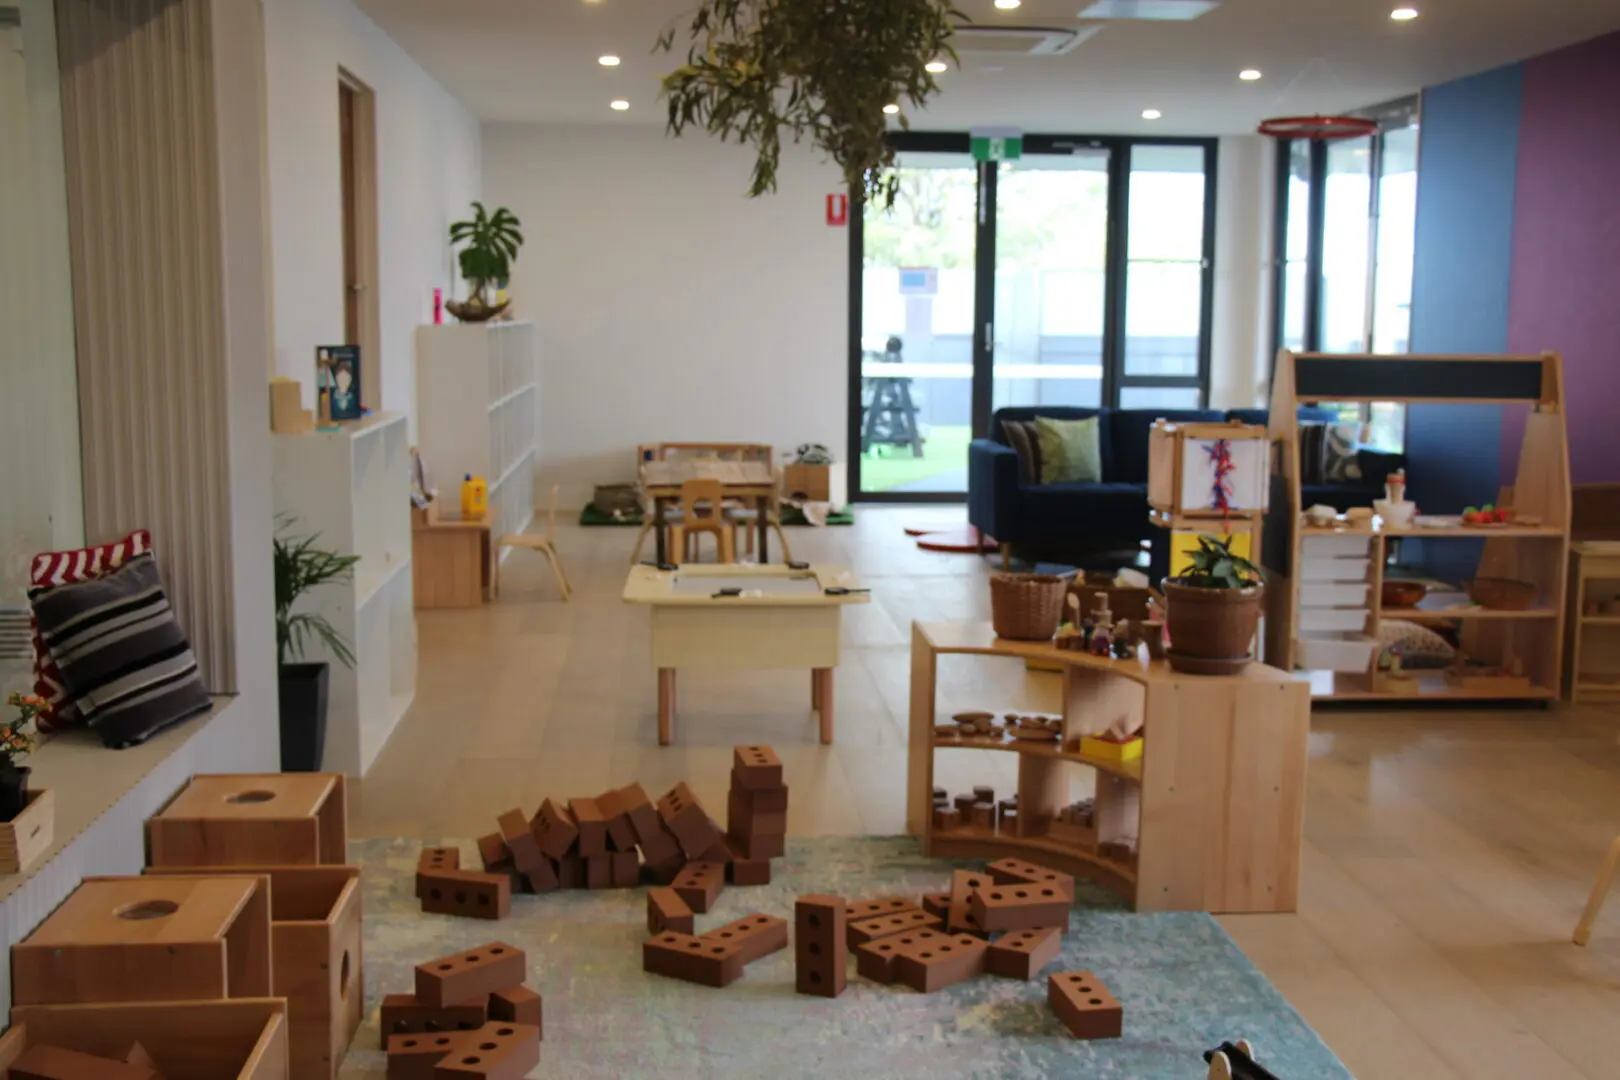 A picture of the small wooden blocks on the floor